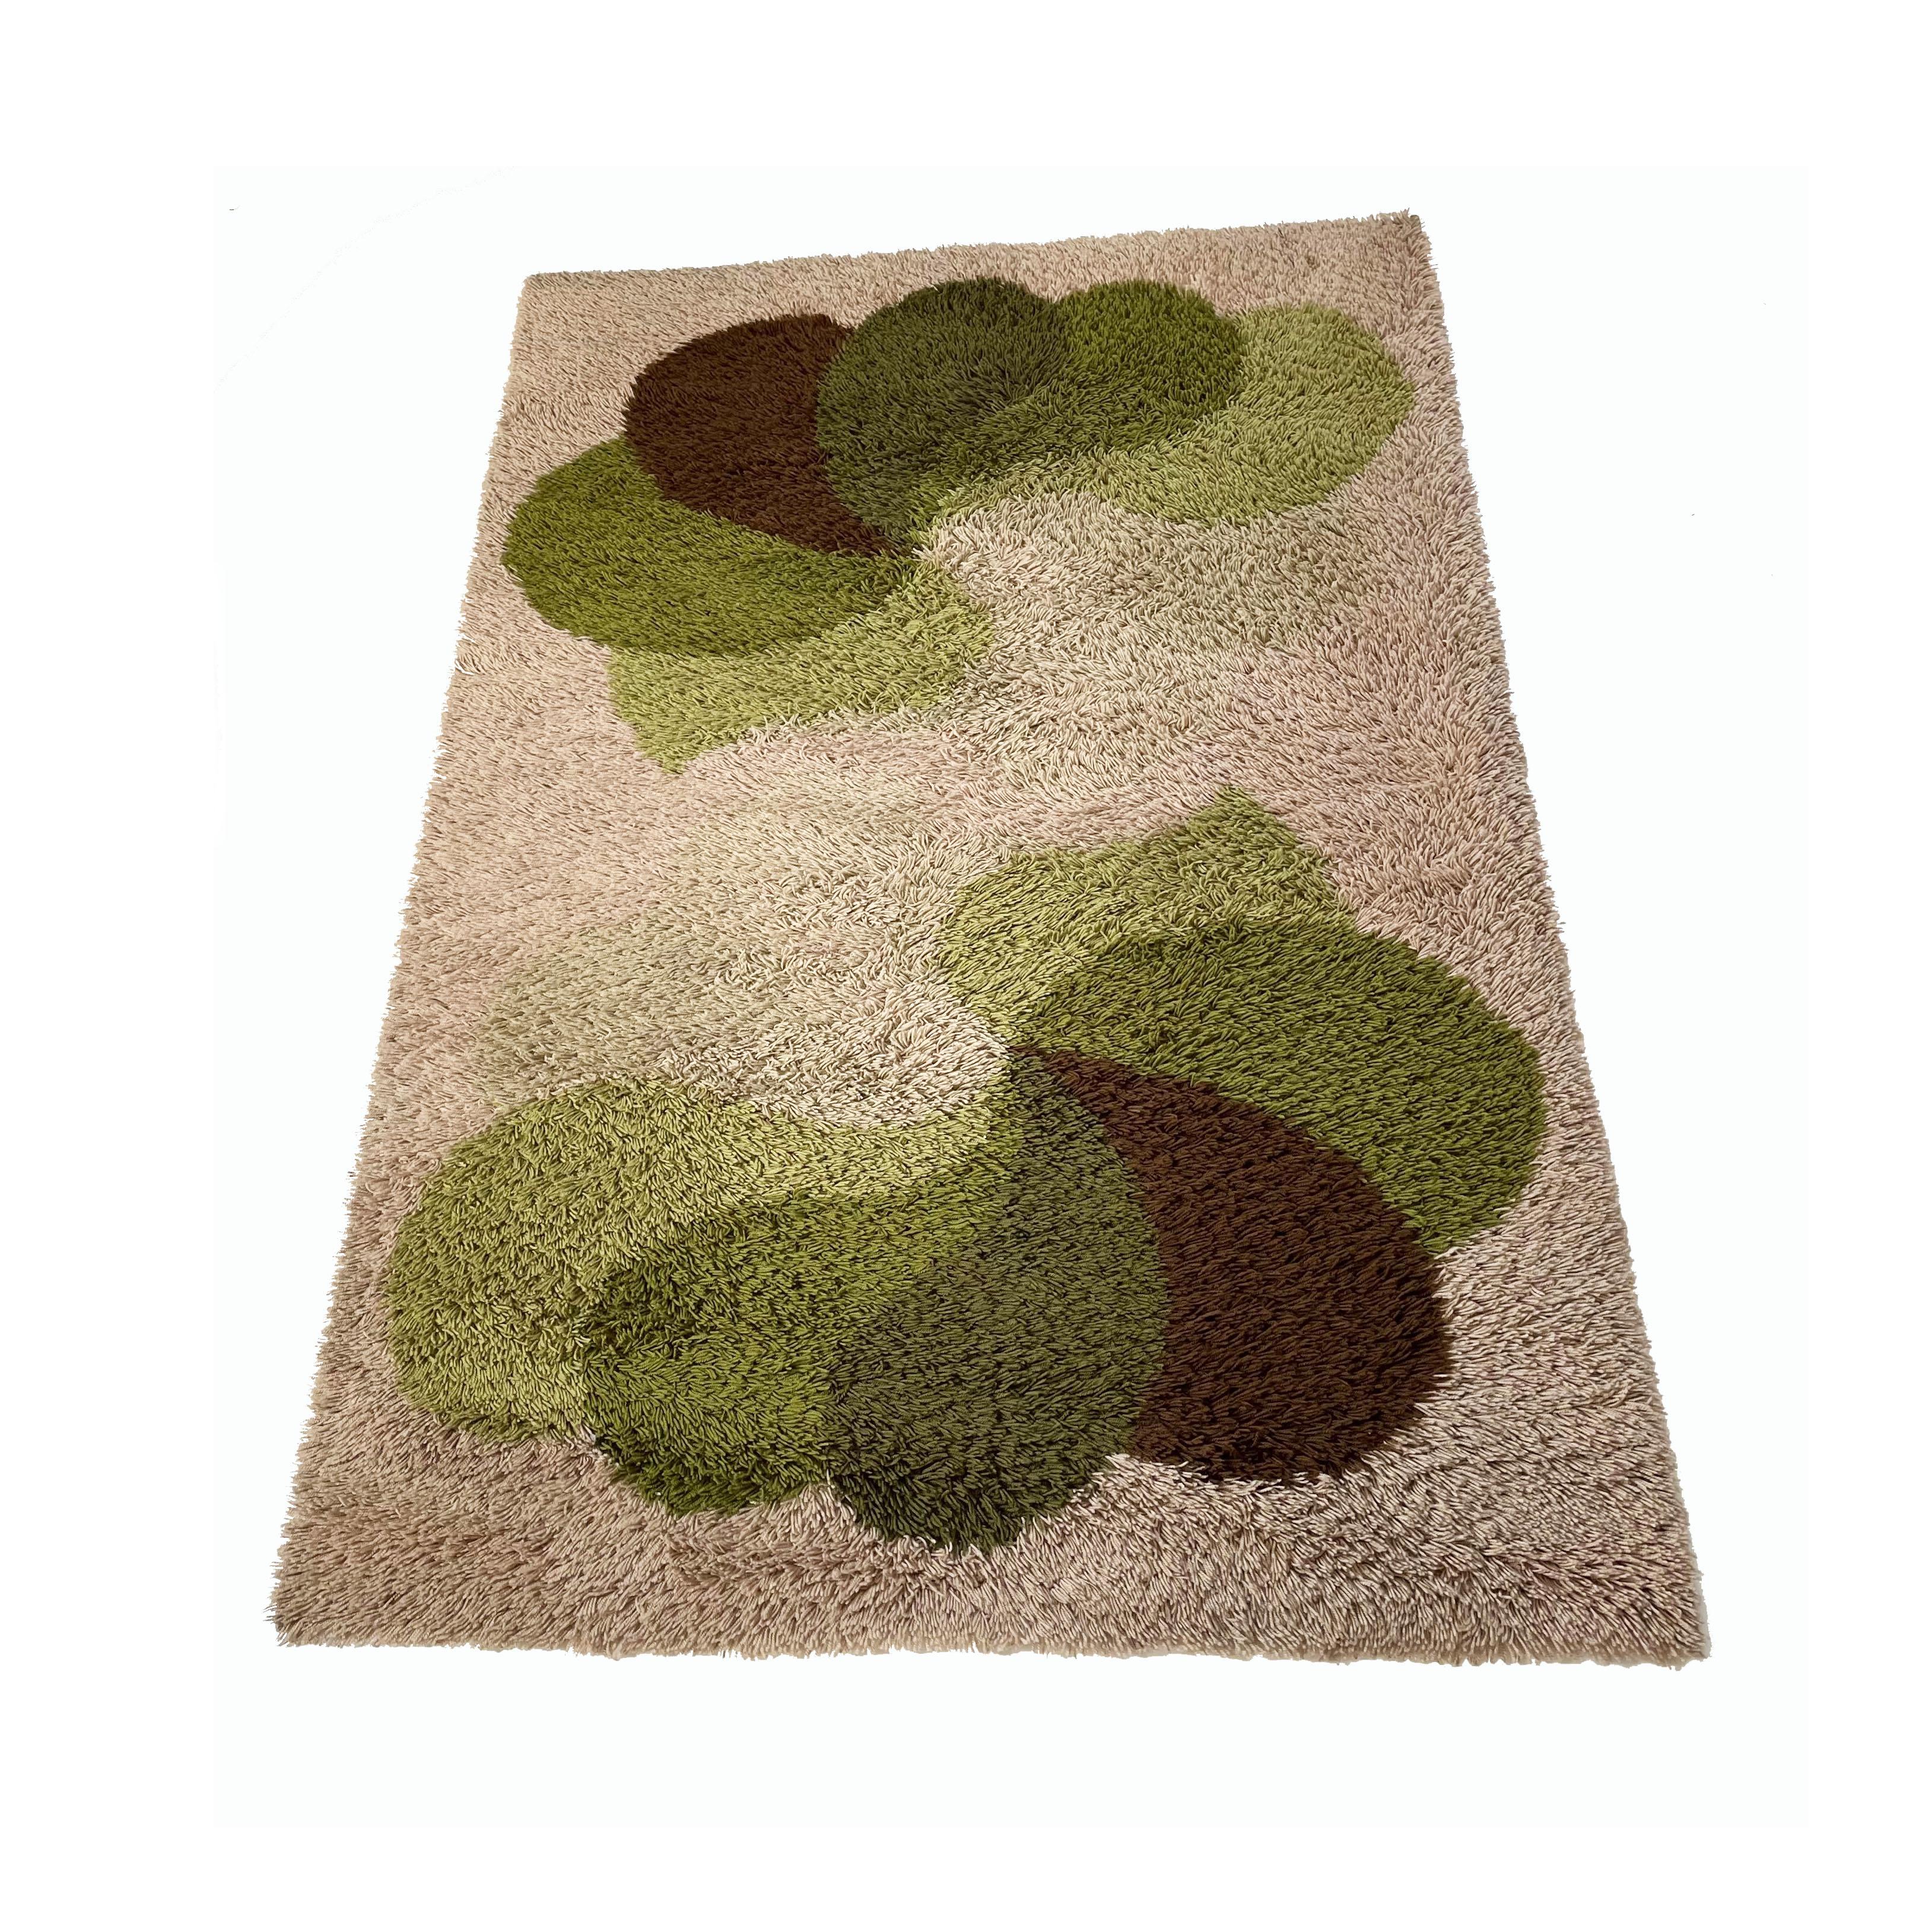 Mid-Century Modern Large Panton Style Multi-Color High Pile Rya Rug by Desso Netherlands, 1970s For Sale